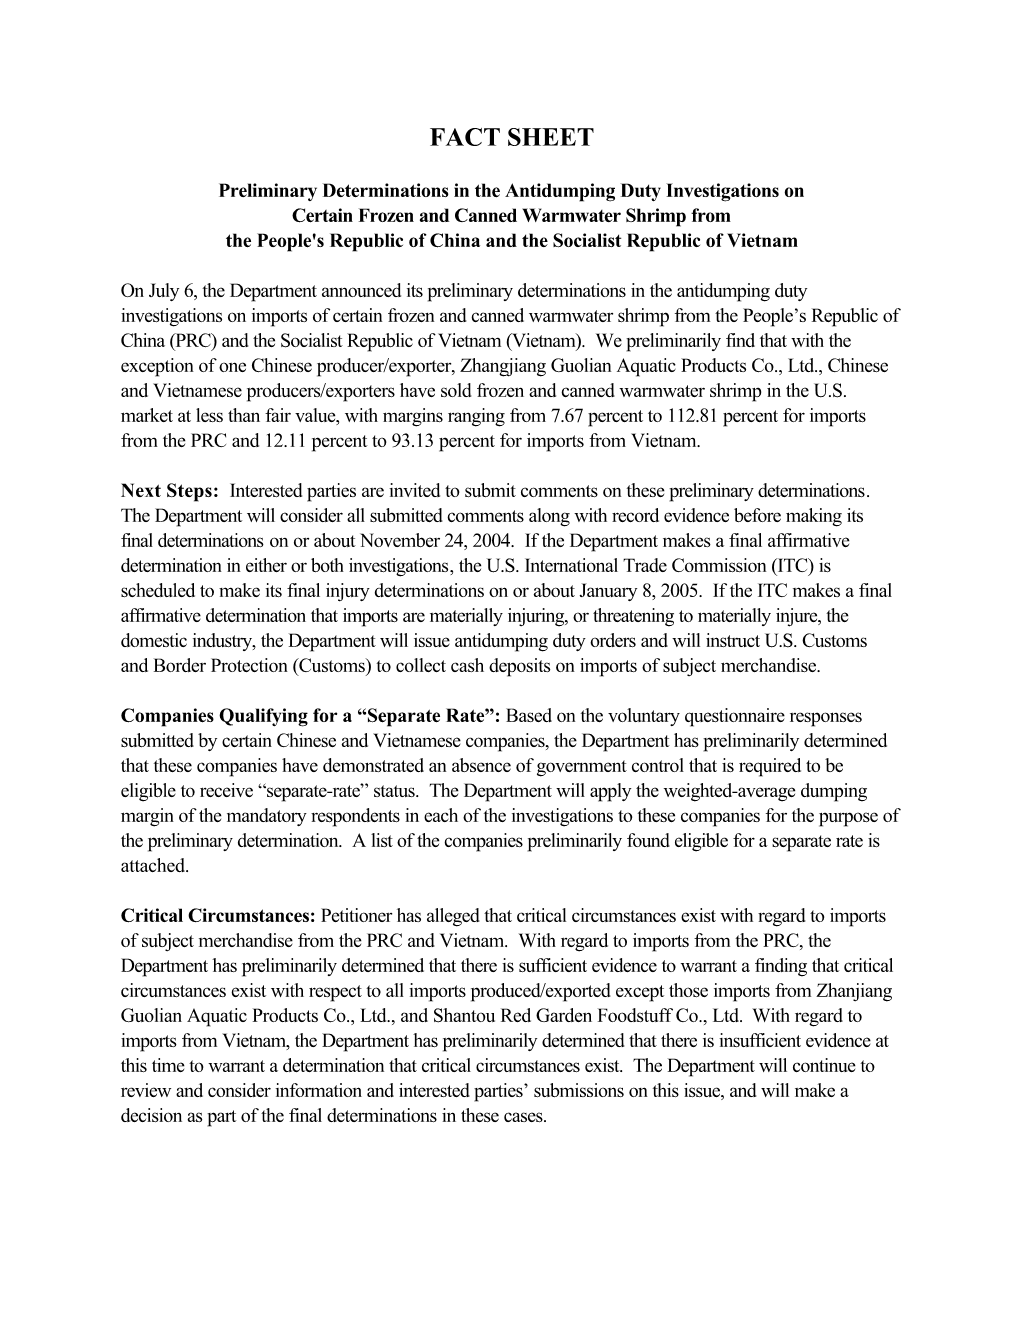 Preliminary Determinations in the Antidumping Duty Investigations On